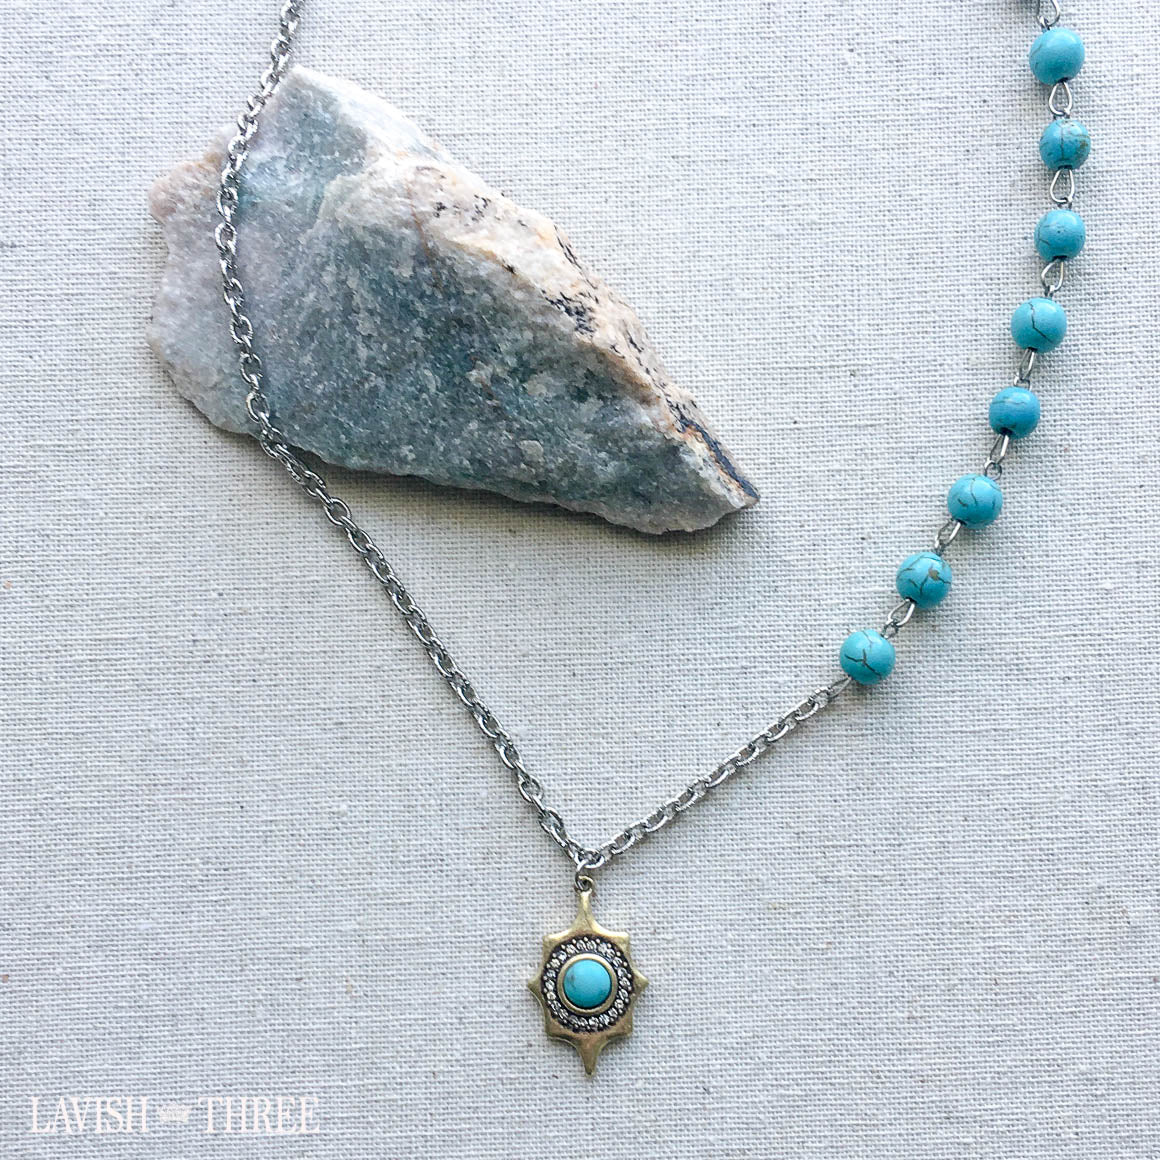 Turquoise and silver chain with gold crystal pendant necklace one of a kind jewelry lavish three 3